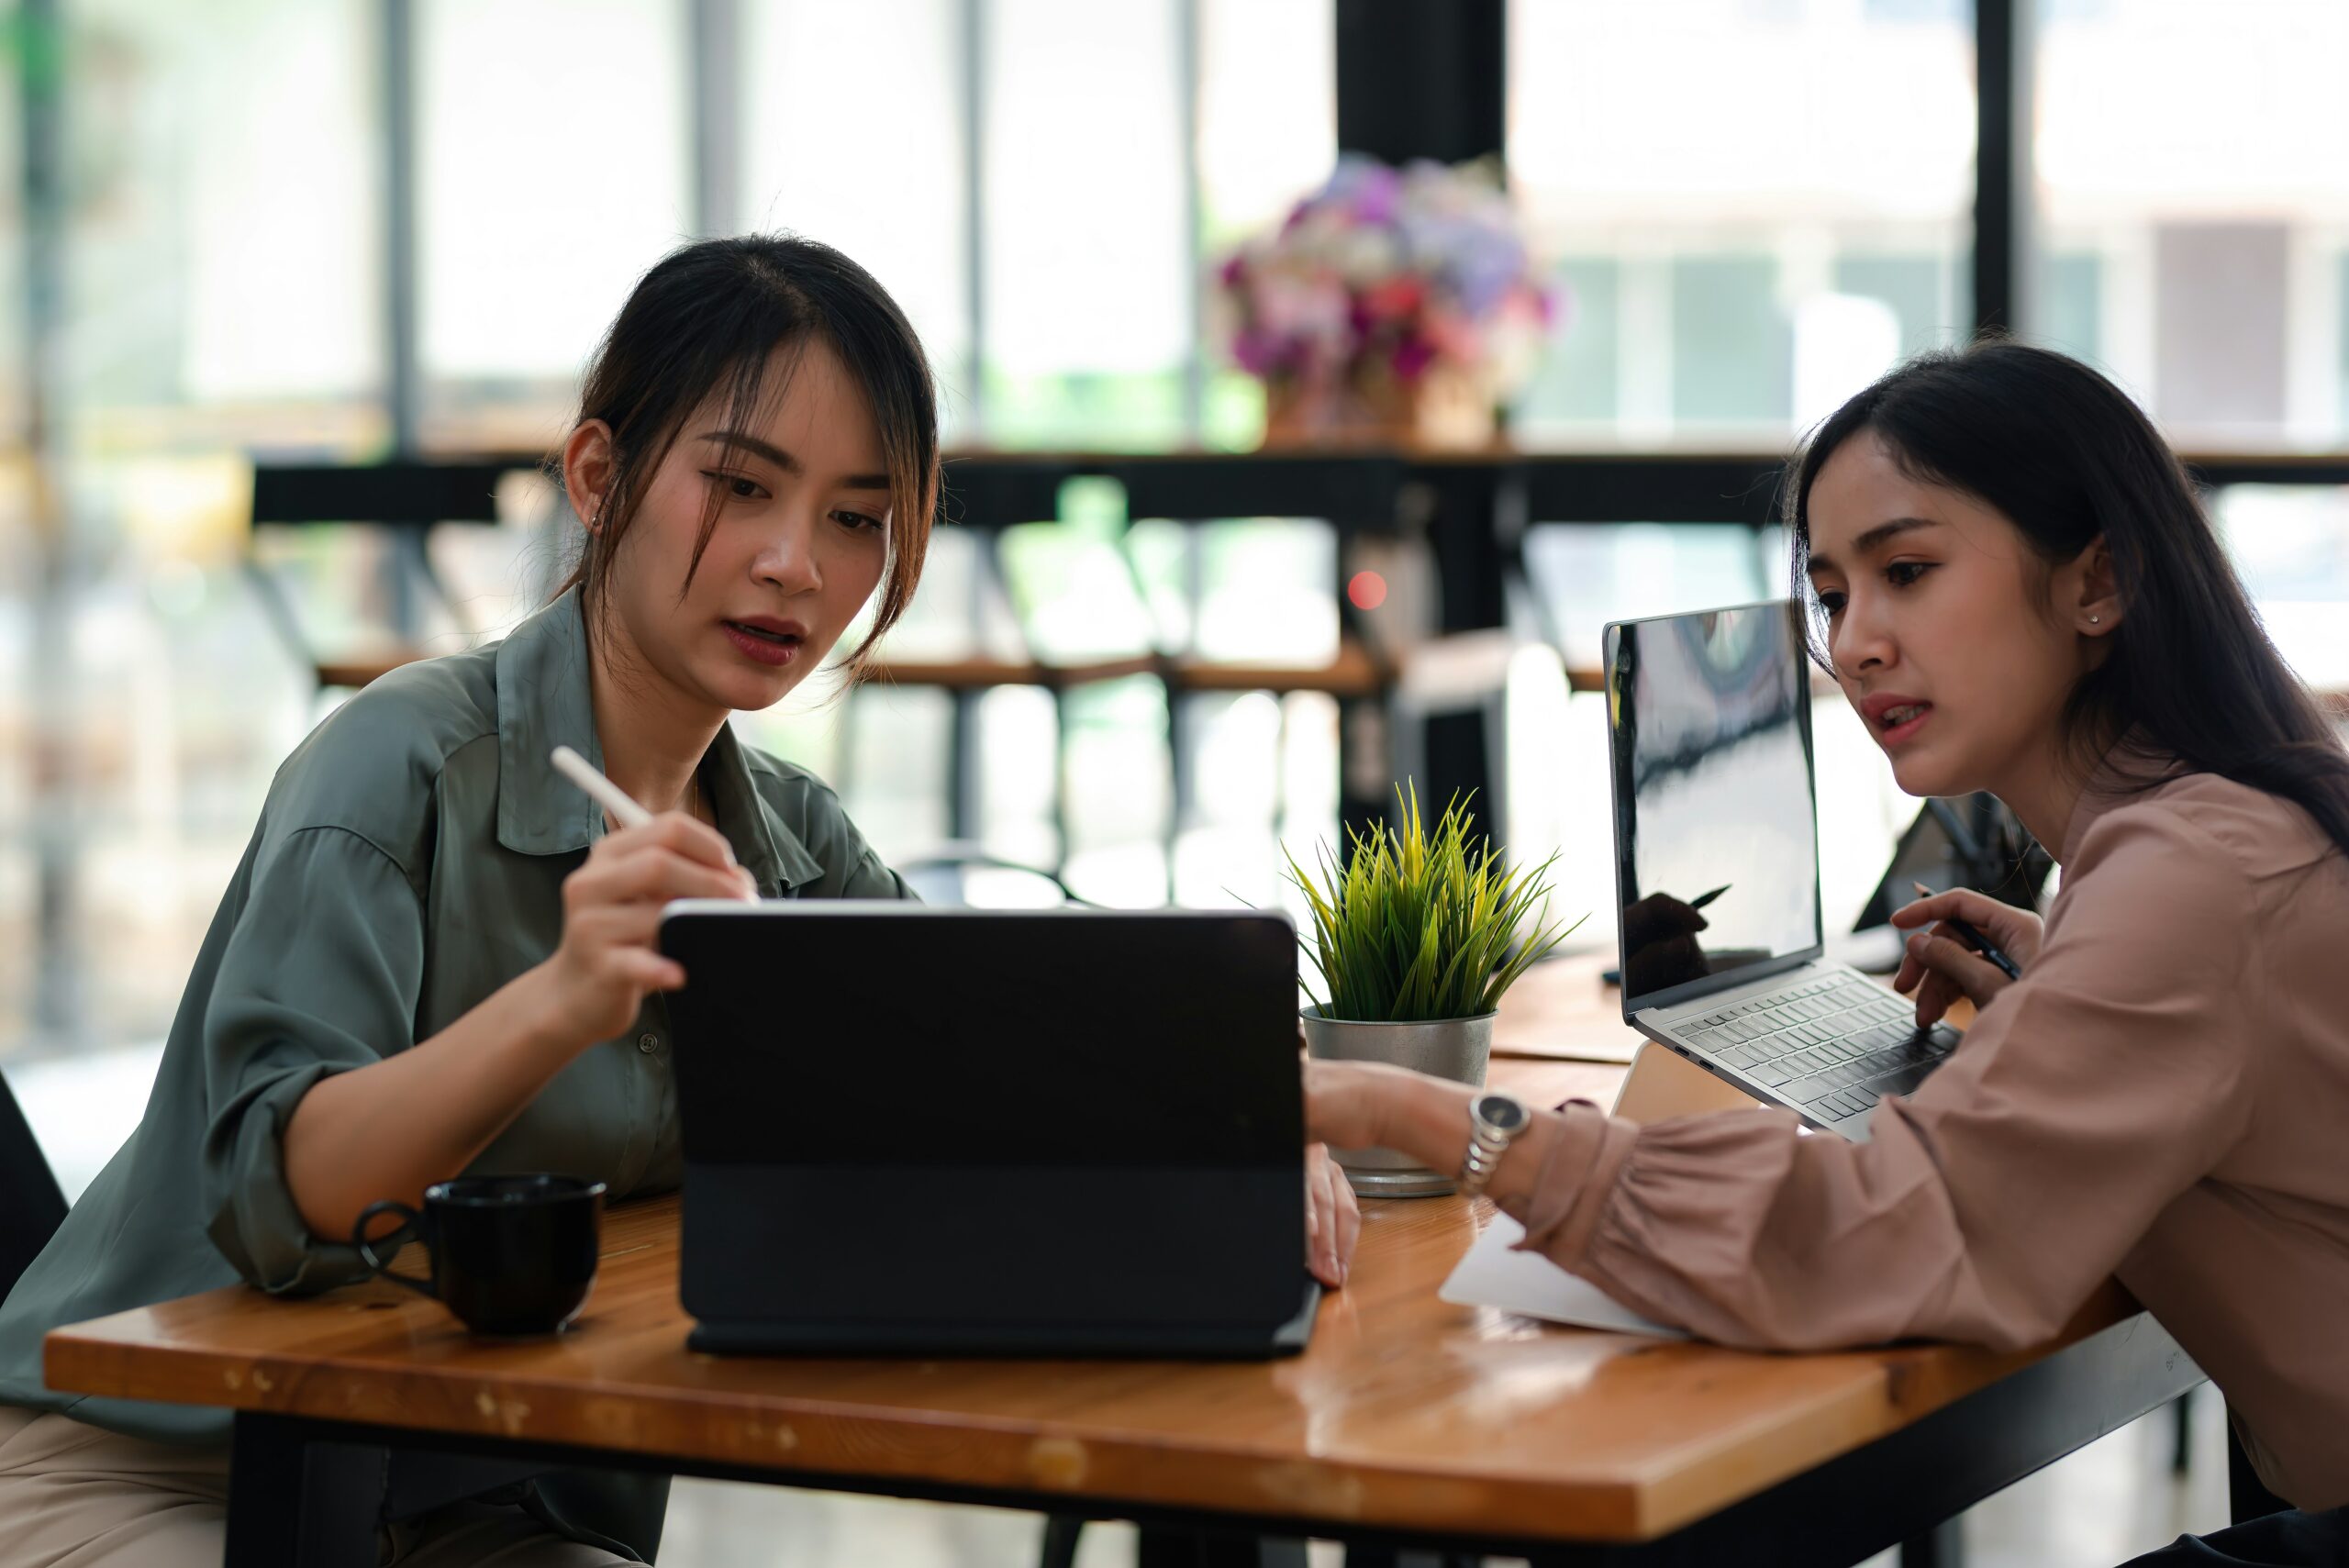 Two women working on tablets in a modern office environment, utilizing types of managed services.